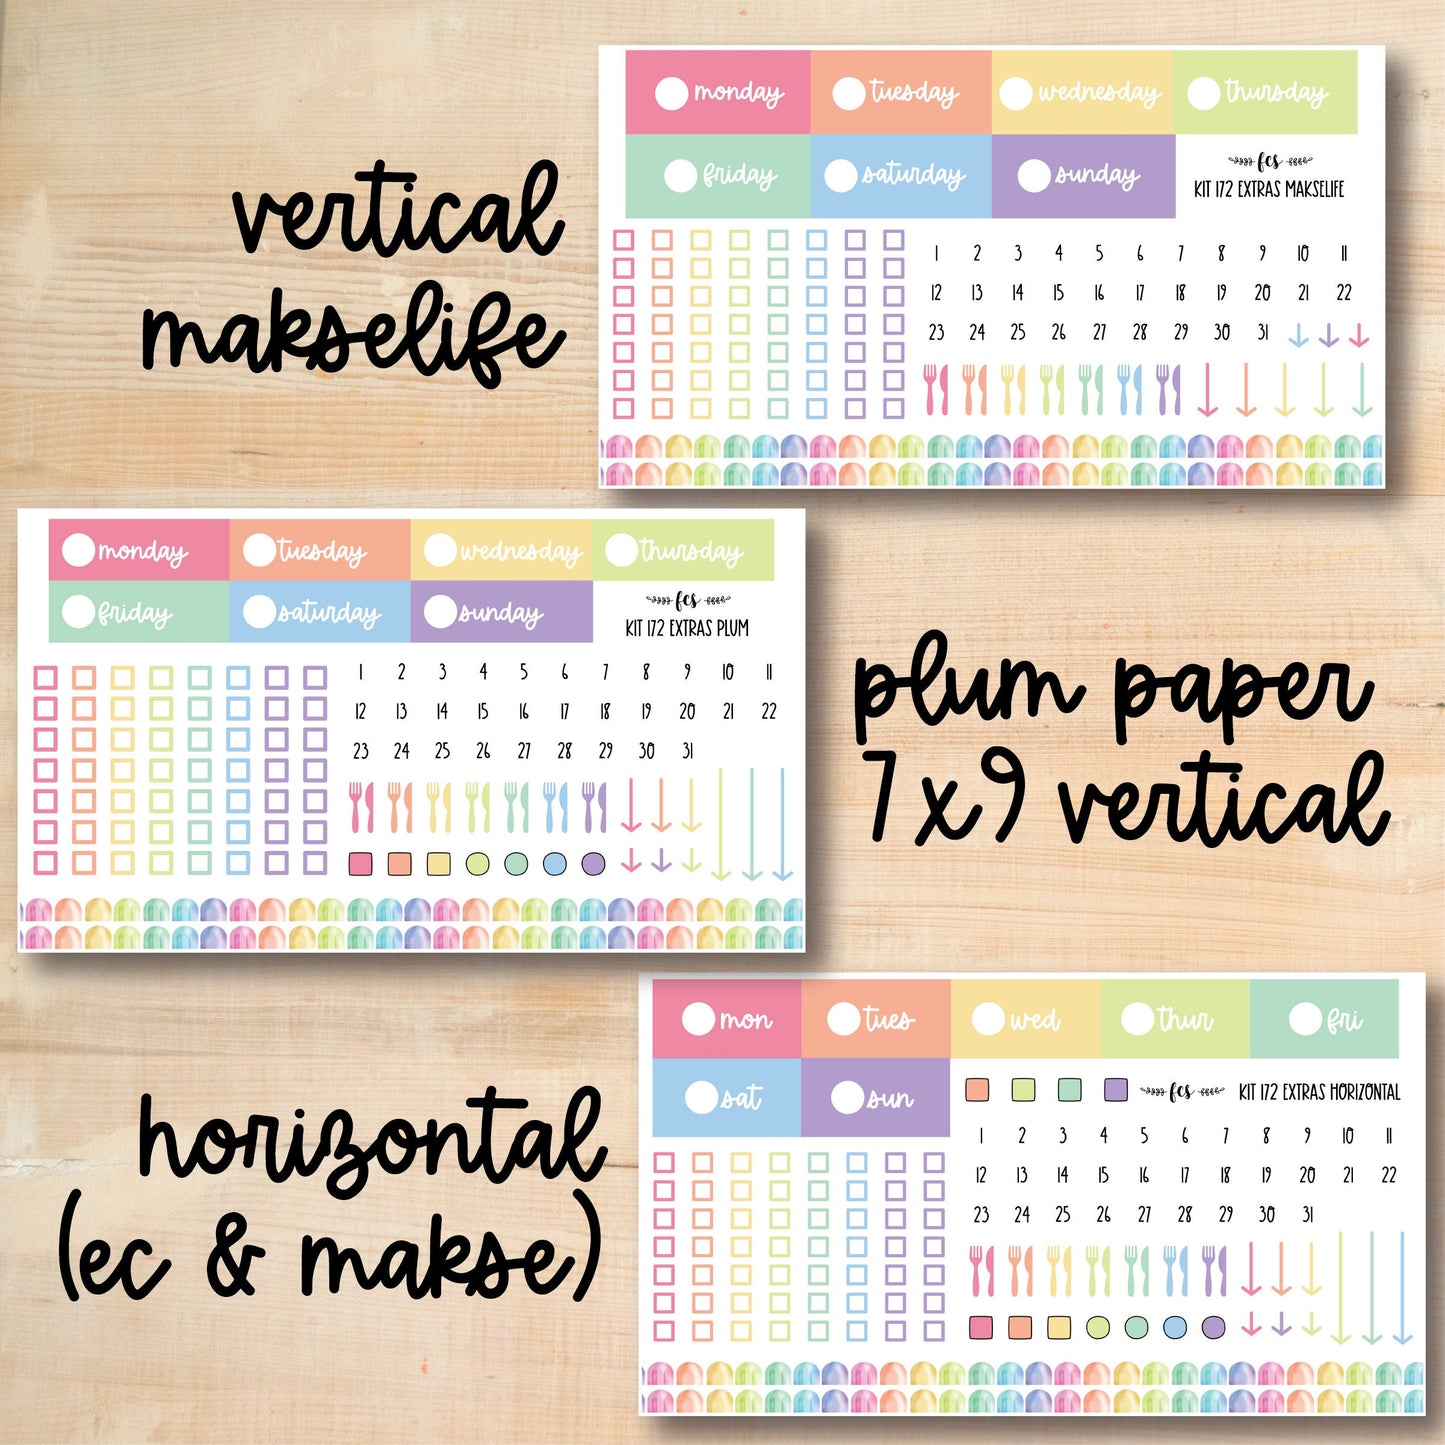 KIT-172 || RAINBOW POPSICLES weekly planner kit for Erin Condren, Plum Paper, MakseLife and more!